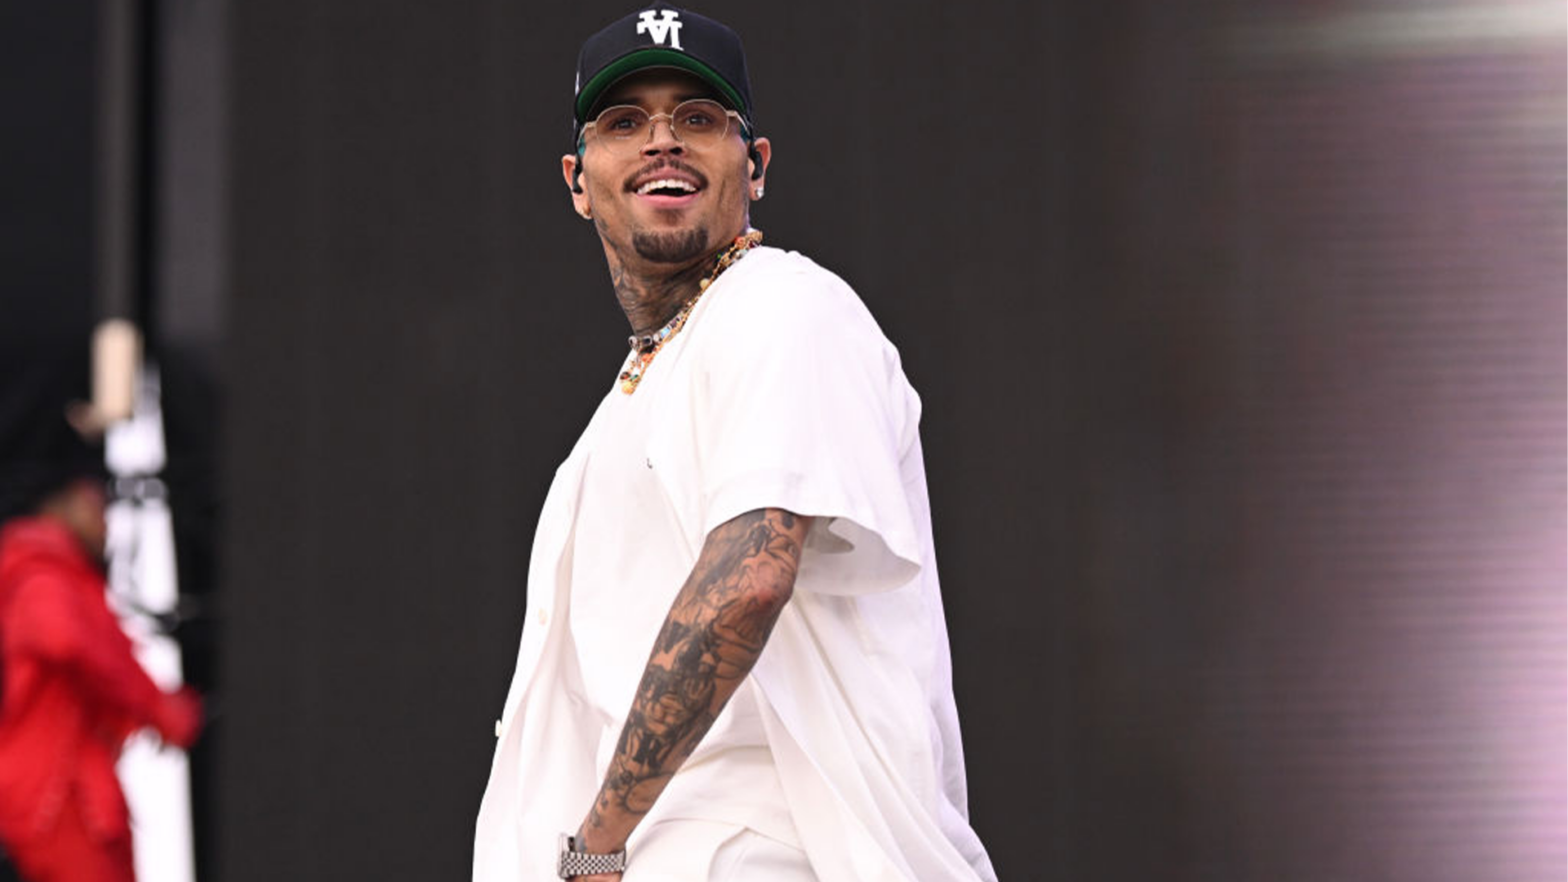 chris brown explains why he began investing at age 17, which led to owning 14 burger king restaurants and more — ‘you need an exit strategy’